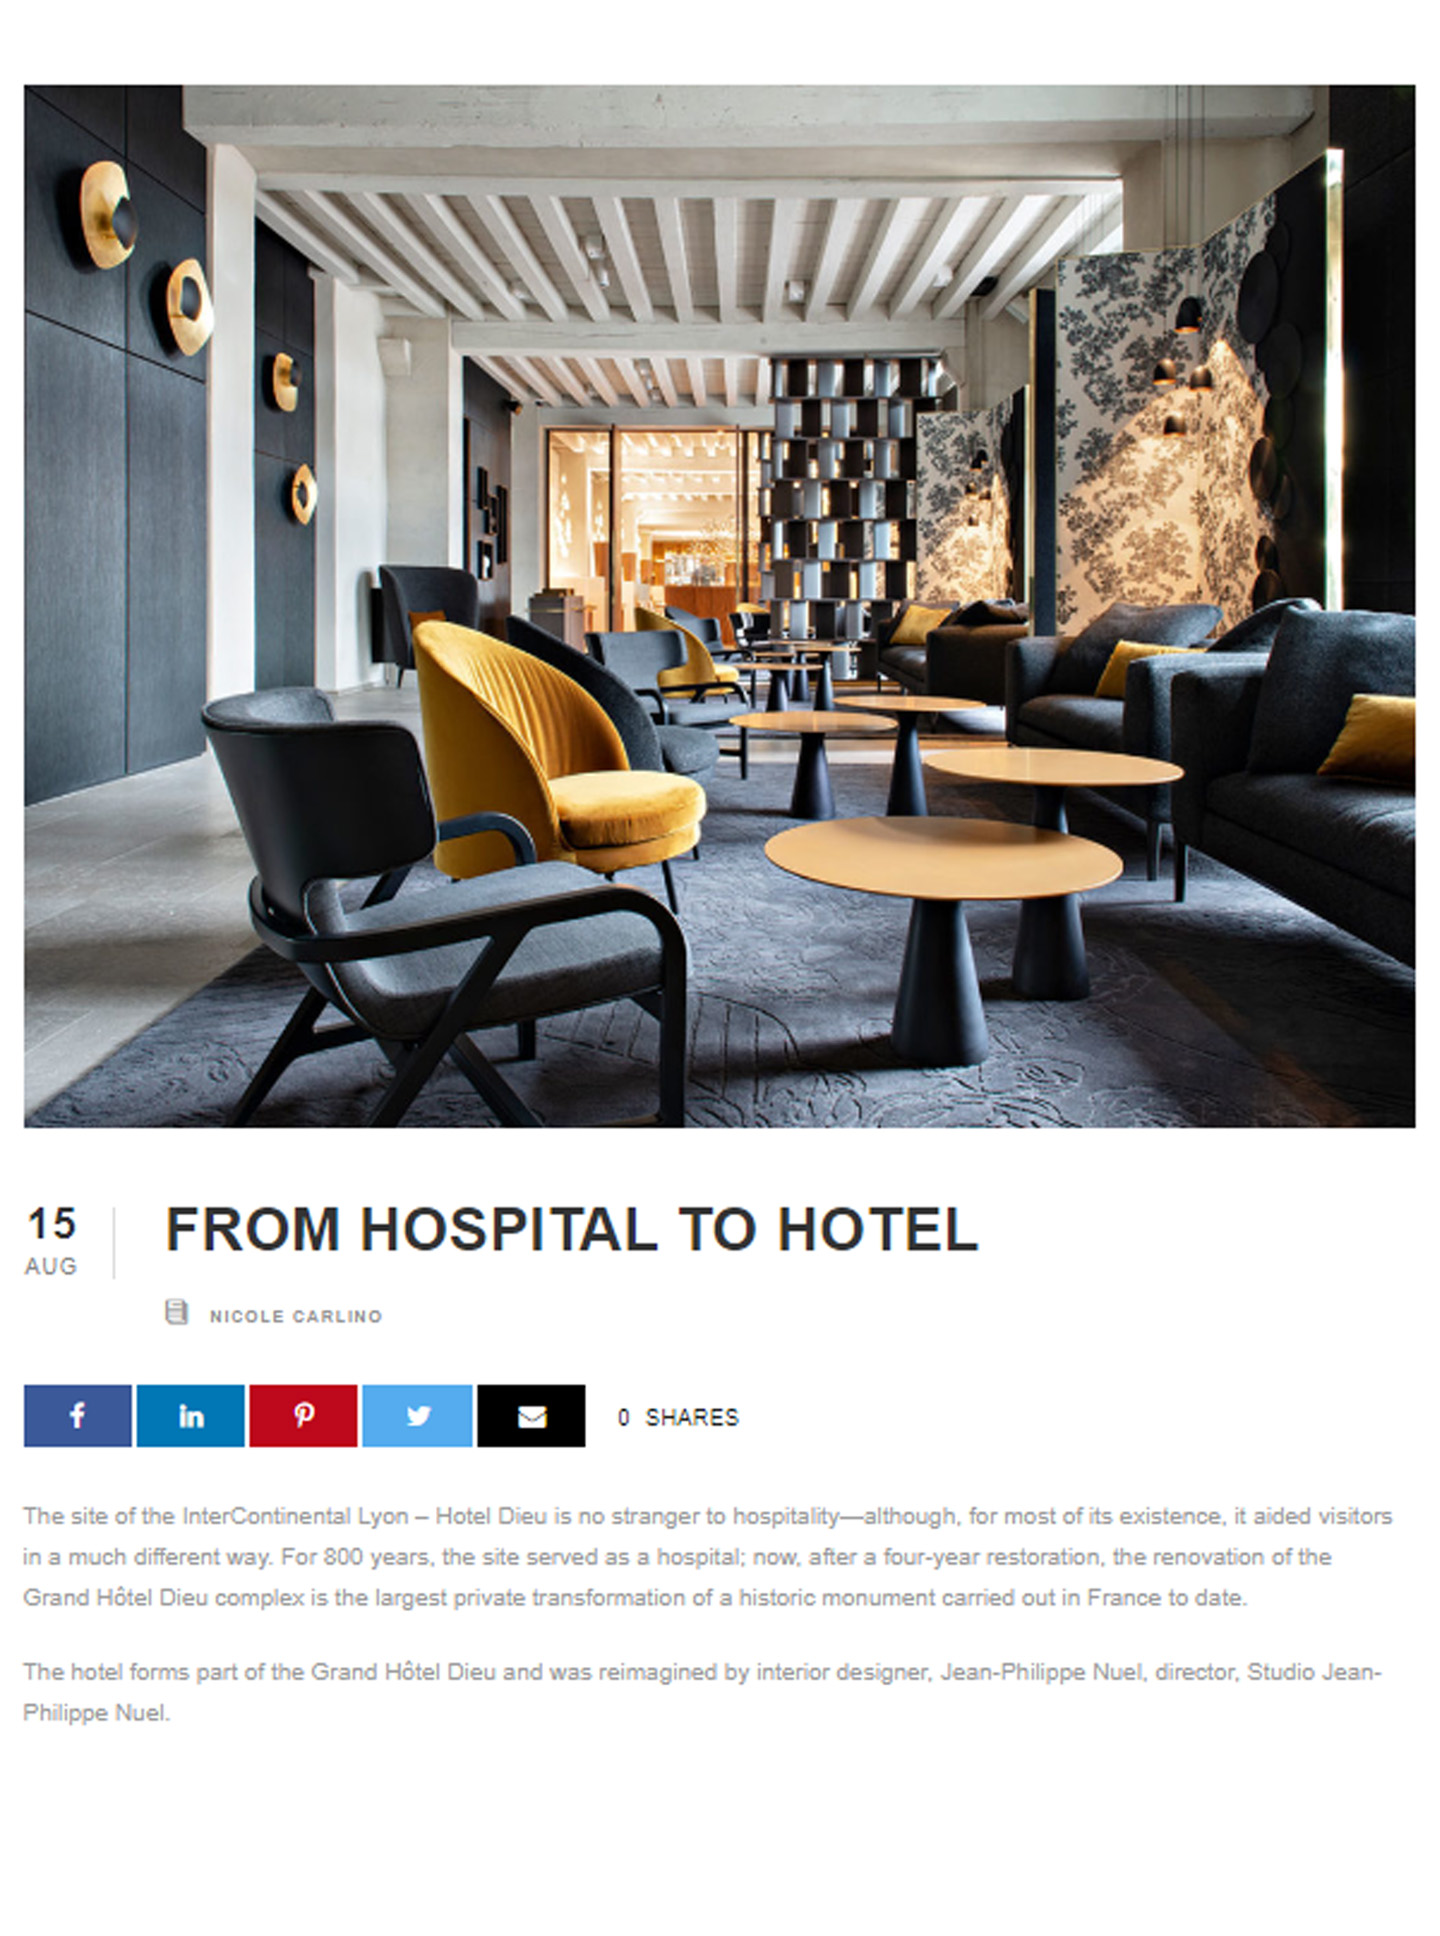 Article on the InterContinental Lyon Hotel Dieu realized by the studio jean-Philippe Nuel in the magazine Inspire design, new luxury hotel, luxury interior design, historical heritage